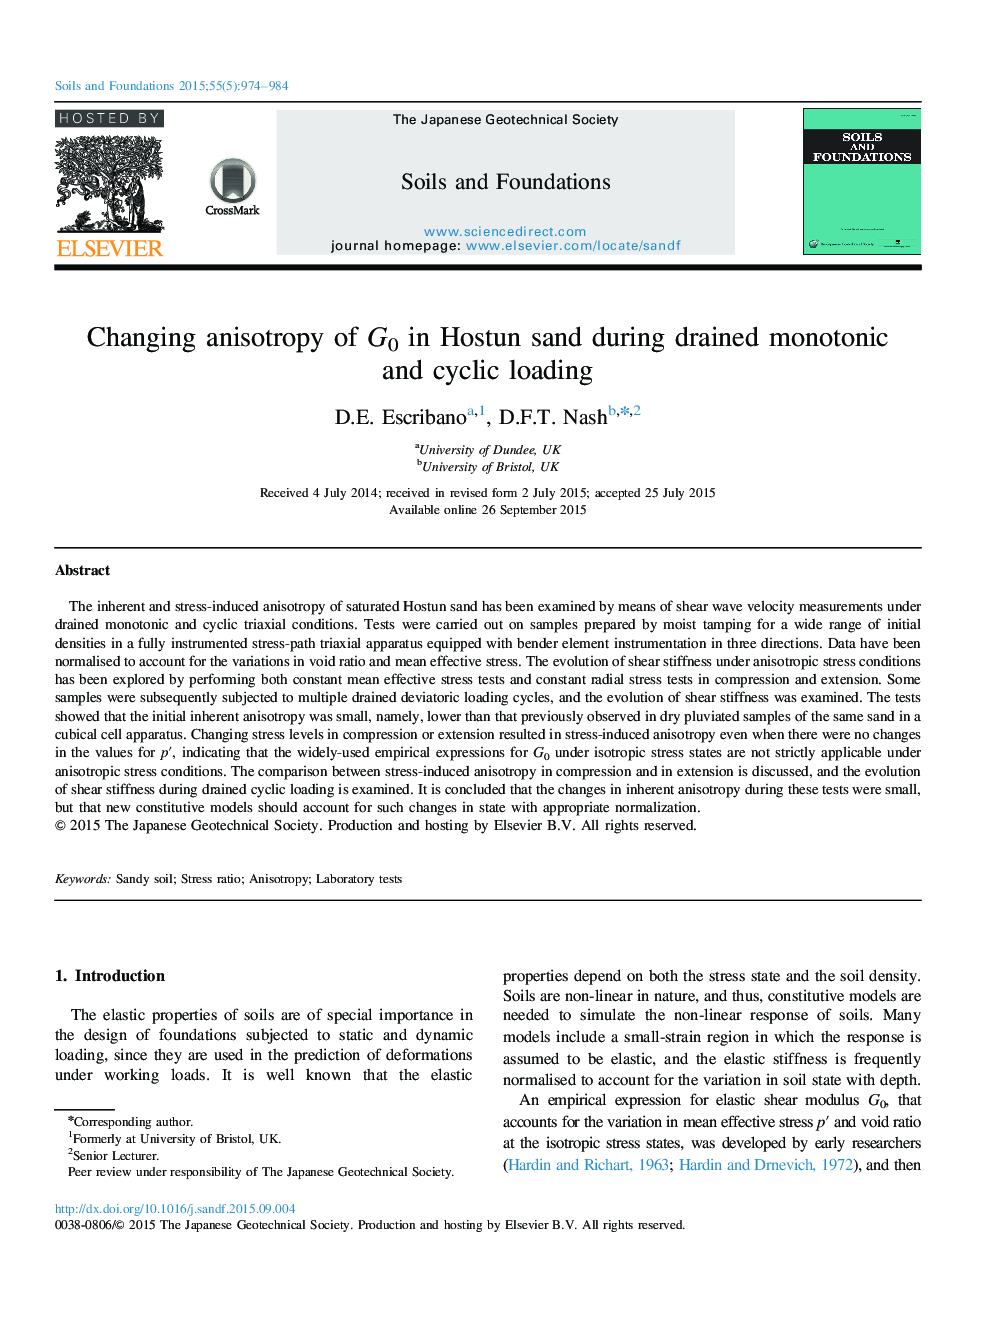 Changing anisotropy of G0 in Hostun sand during drained monotonic and cyclic loading